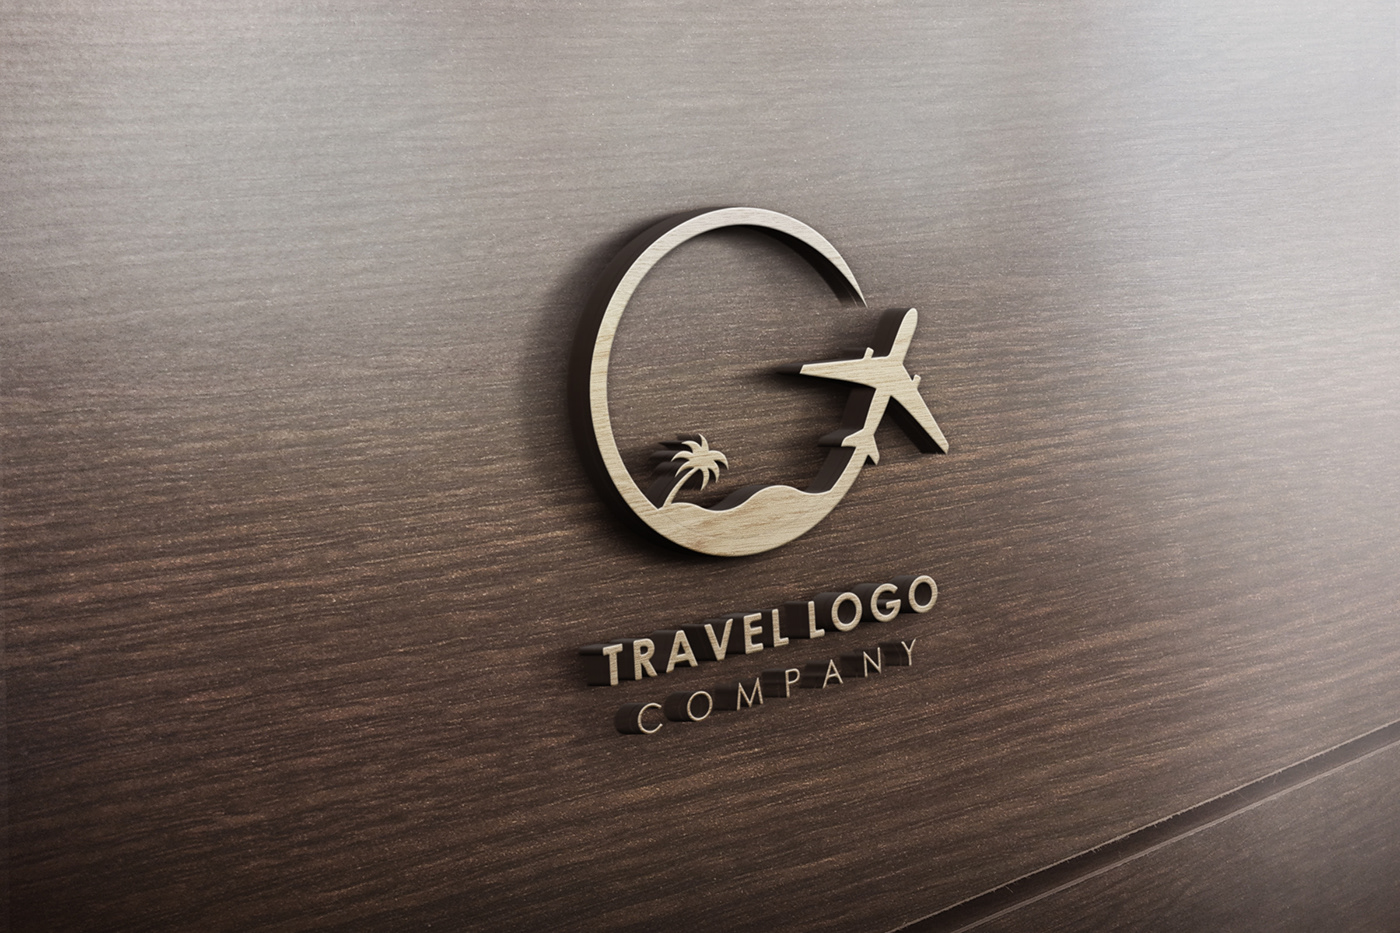 LOGO FOR TRAVEL AGENCY
TRAVEL GUIDE APP ICON
TRAVEL LOGO DESIGN
TRAVEL COMPANY LOGO
TRAVEL BUSNINES 